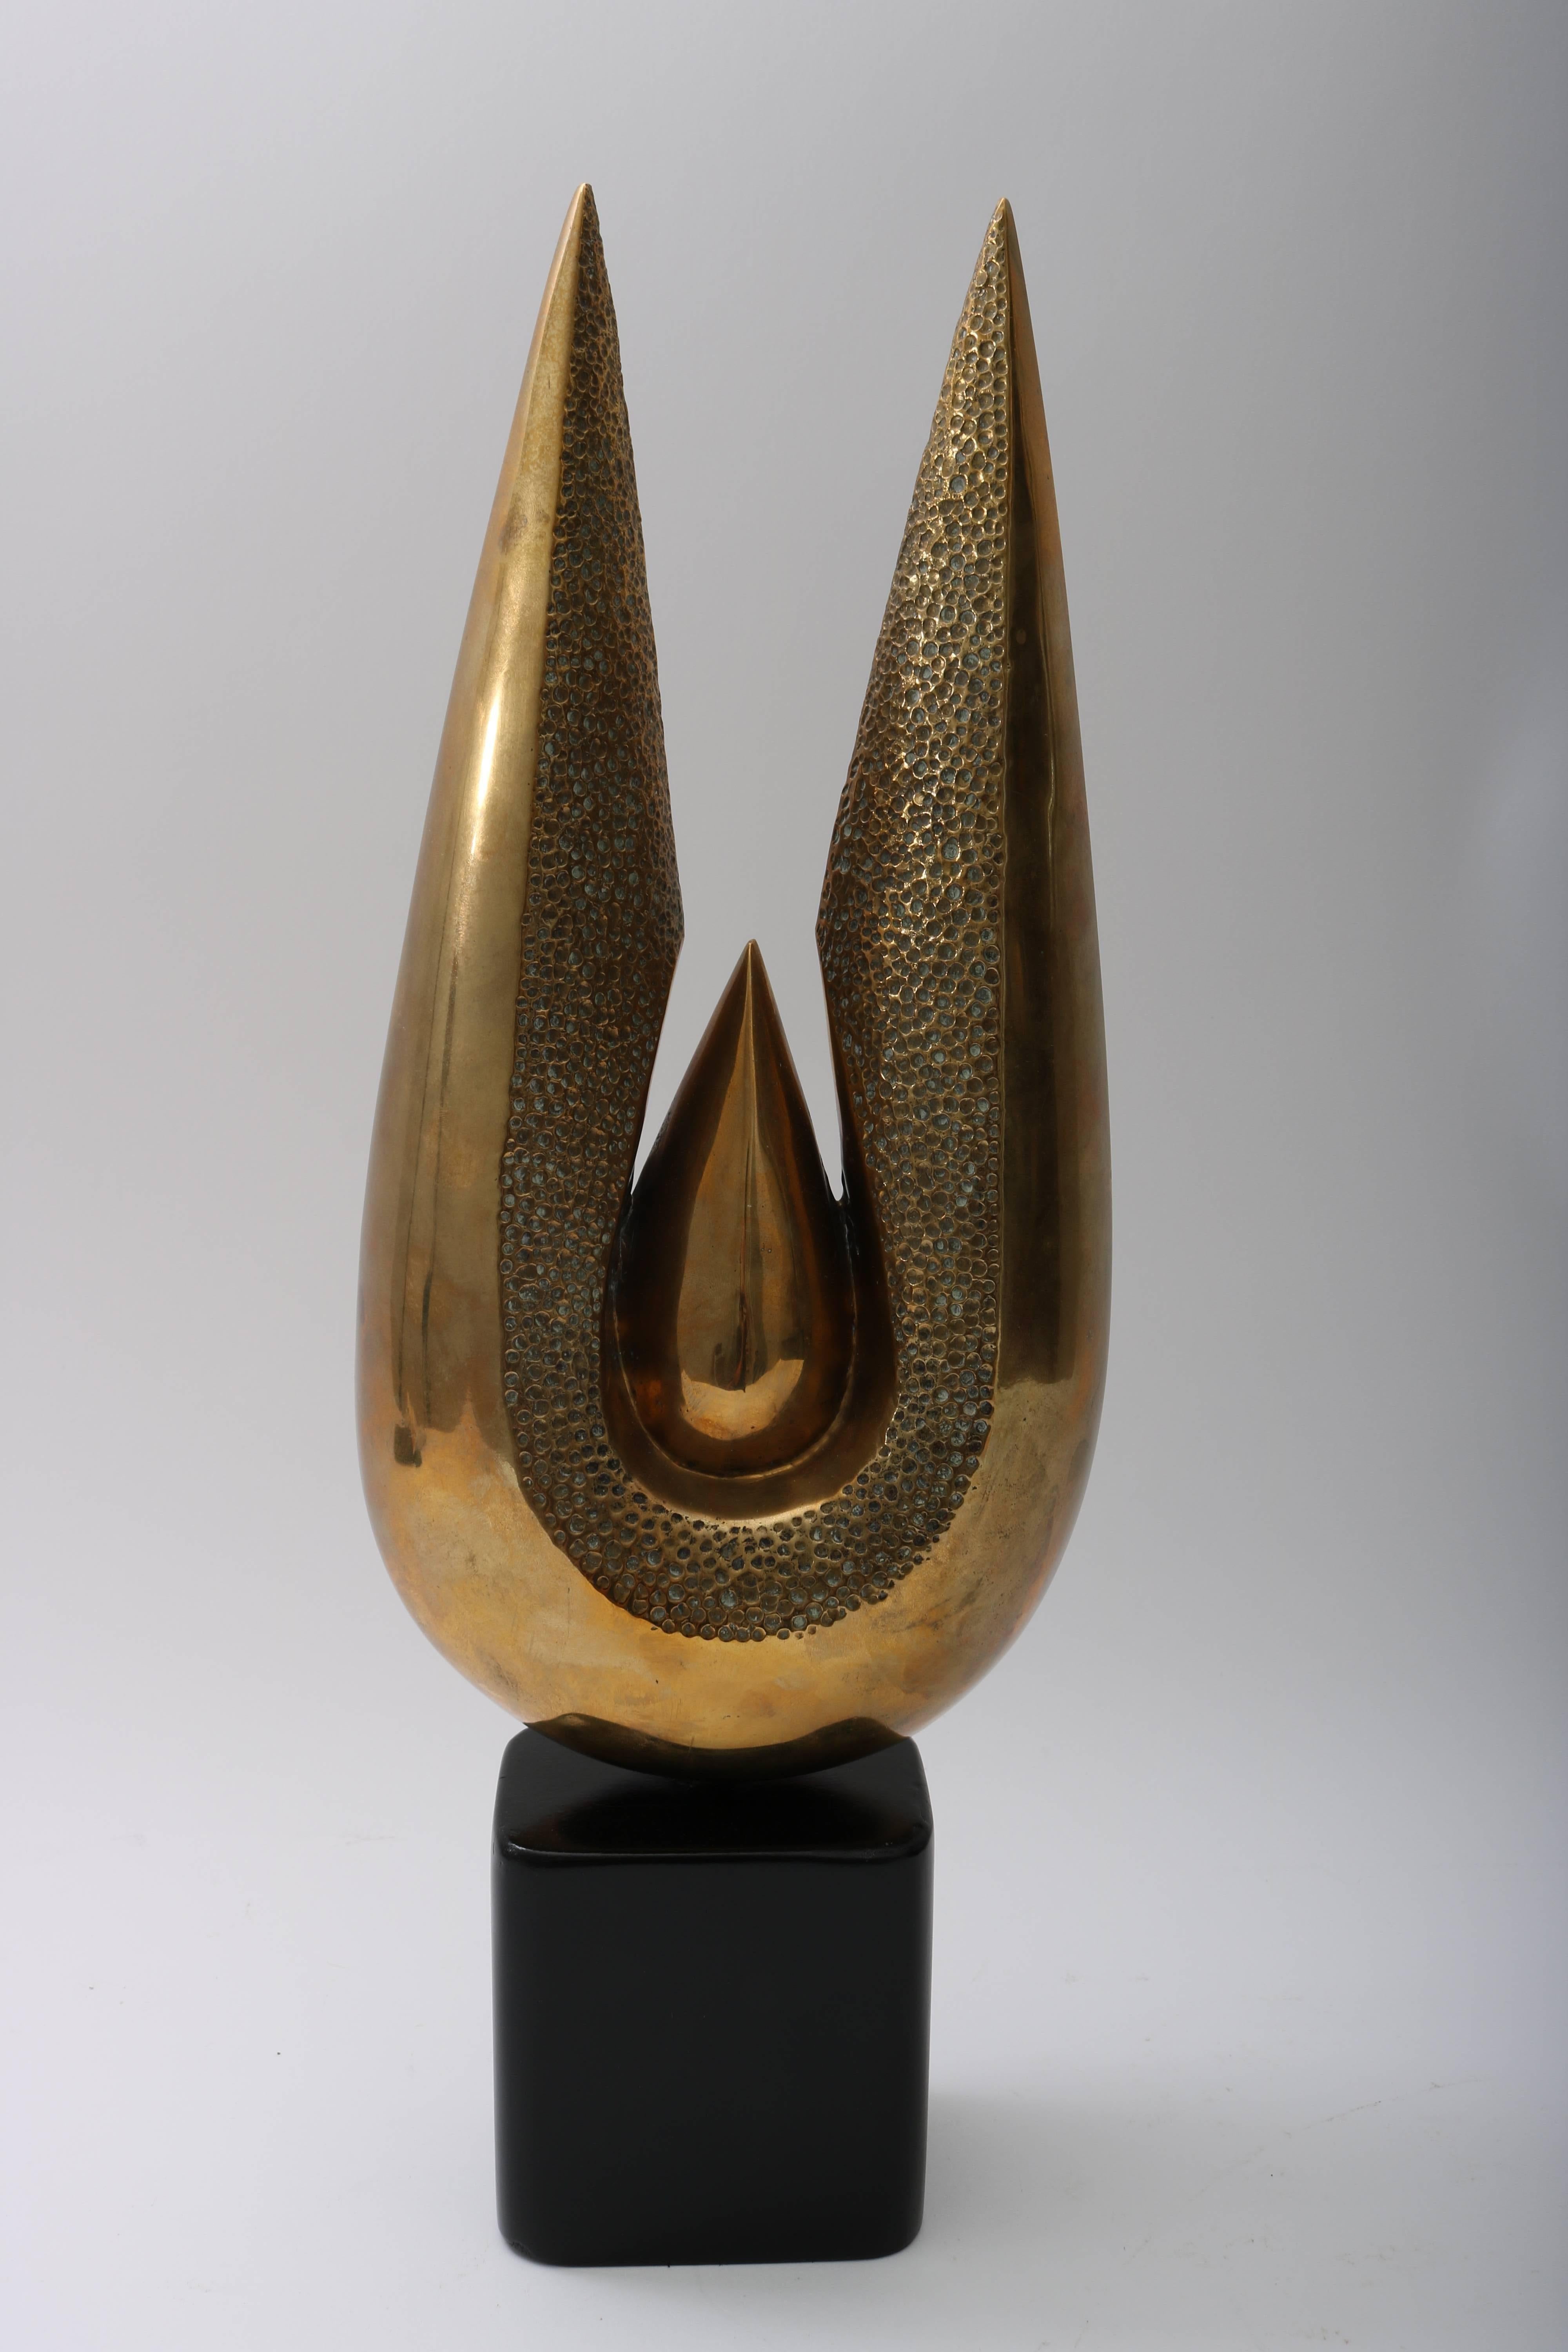 This stylish bronze piece dates to the mid-20th century and was created in Thailand. The organic, stylized form is quite modern and will make a great addition to your home.

Note: Piece is signed and numbered. SURAWONGSE 3/1000.

 